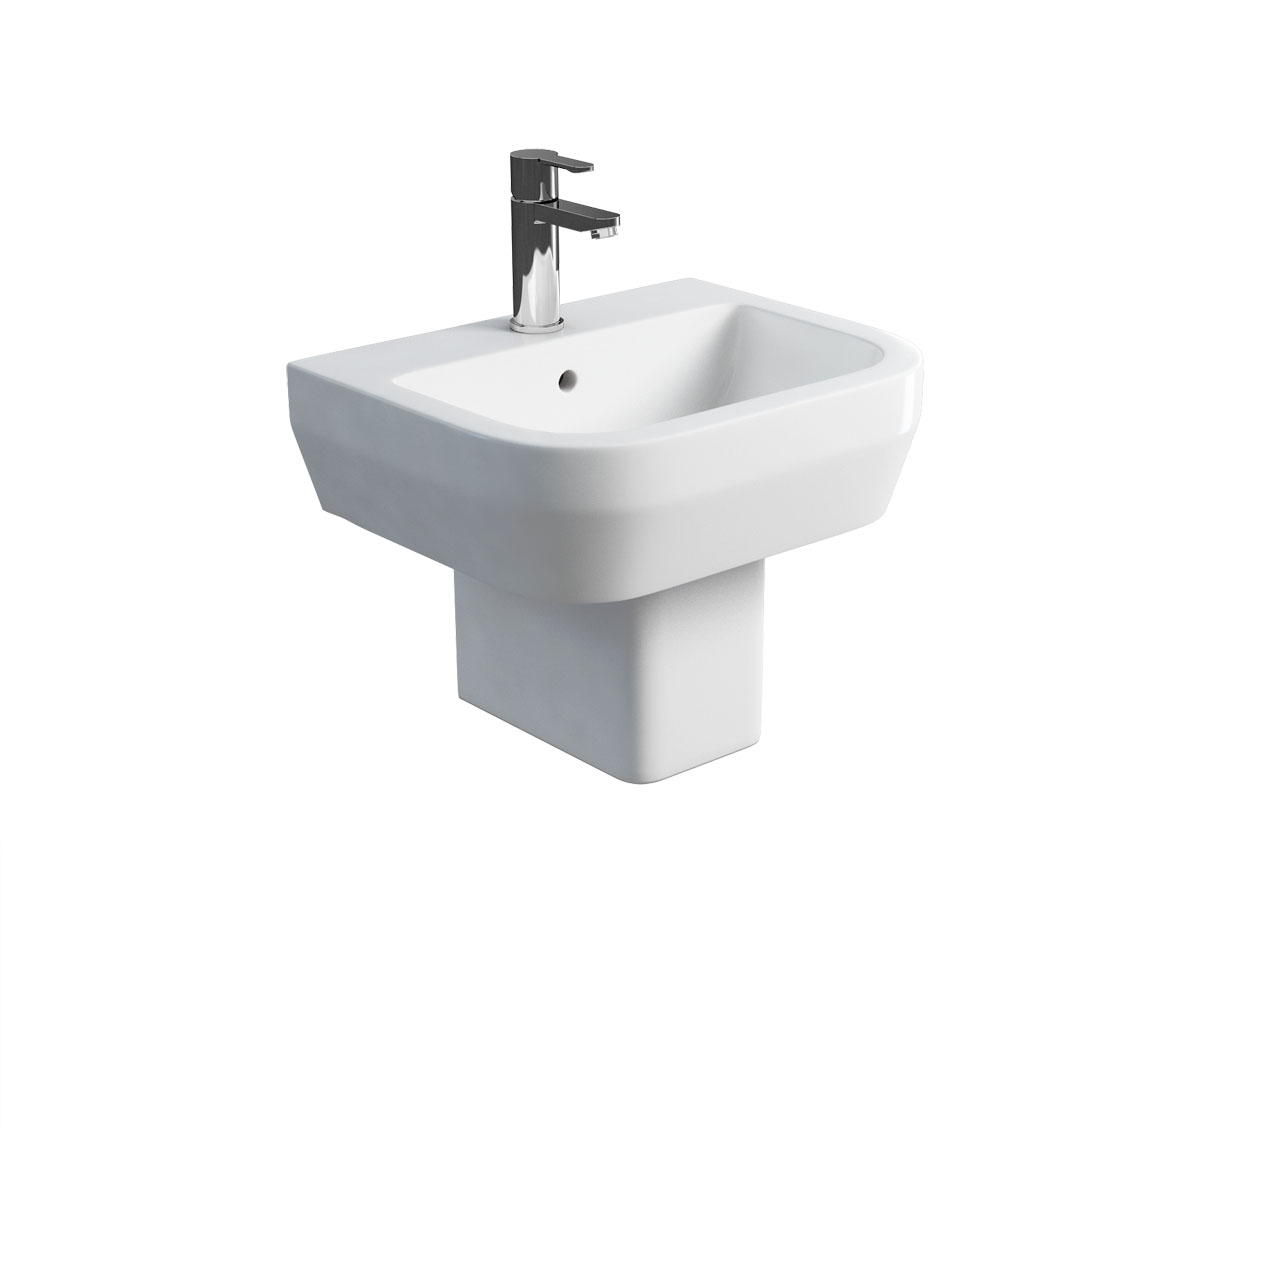 Curve S30 500 basin and square fronted semi pedestal